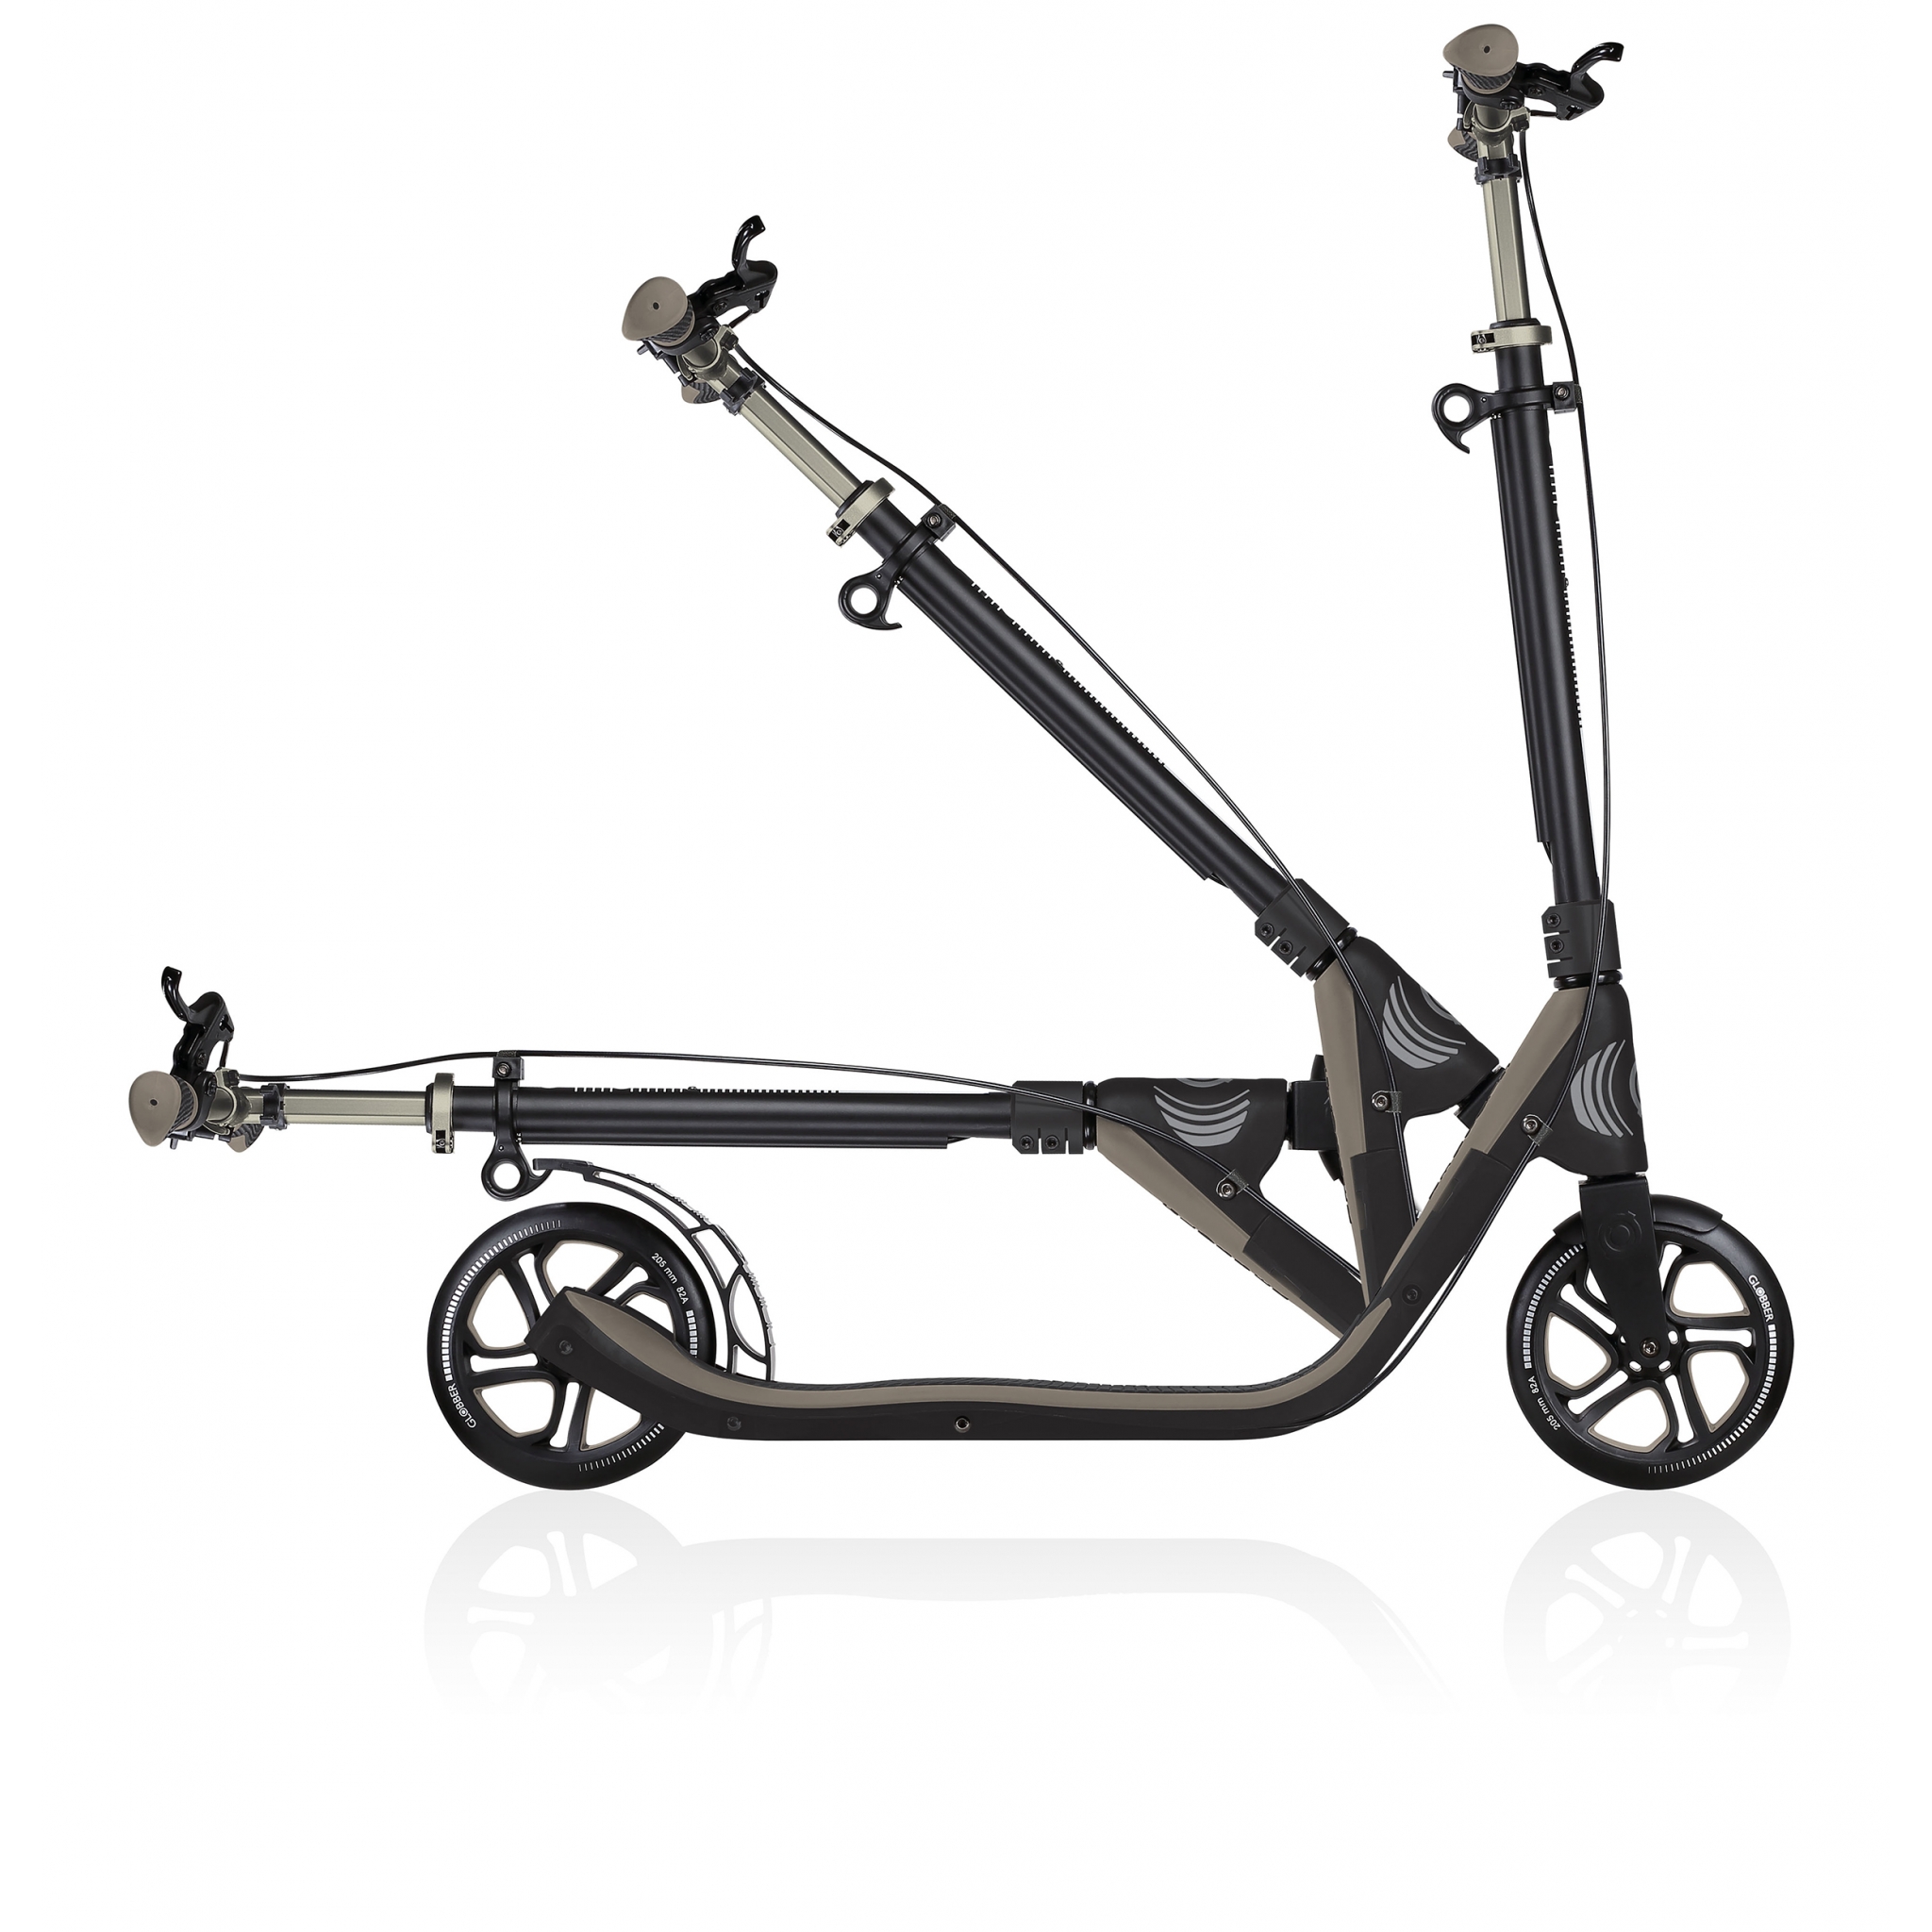 foldable scooter for adults with handbrake - Globber ONE NL 205 DELUXE 3